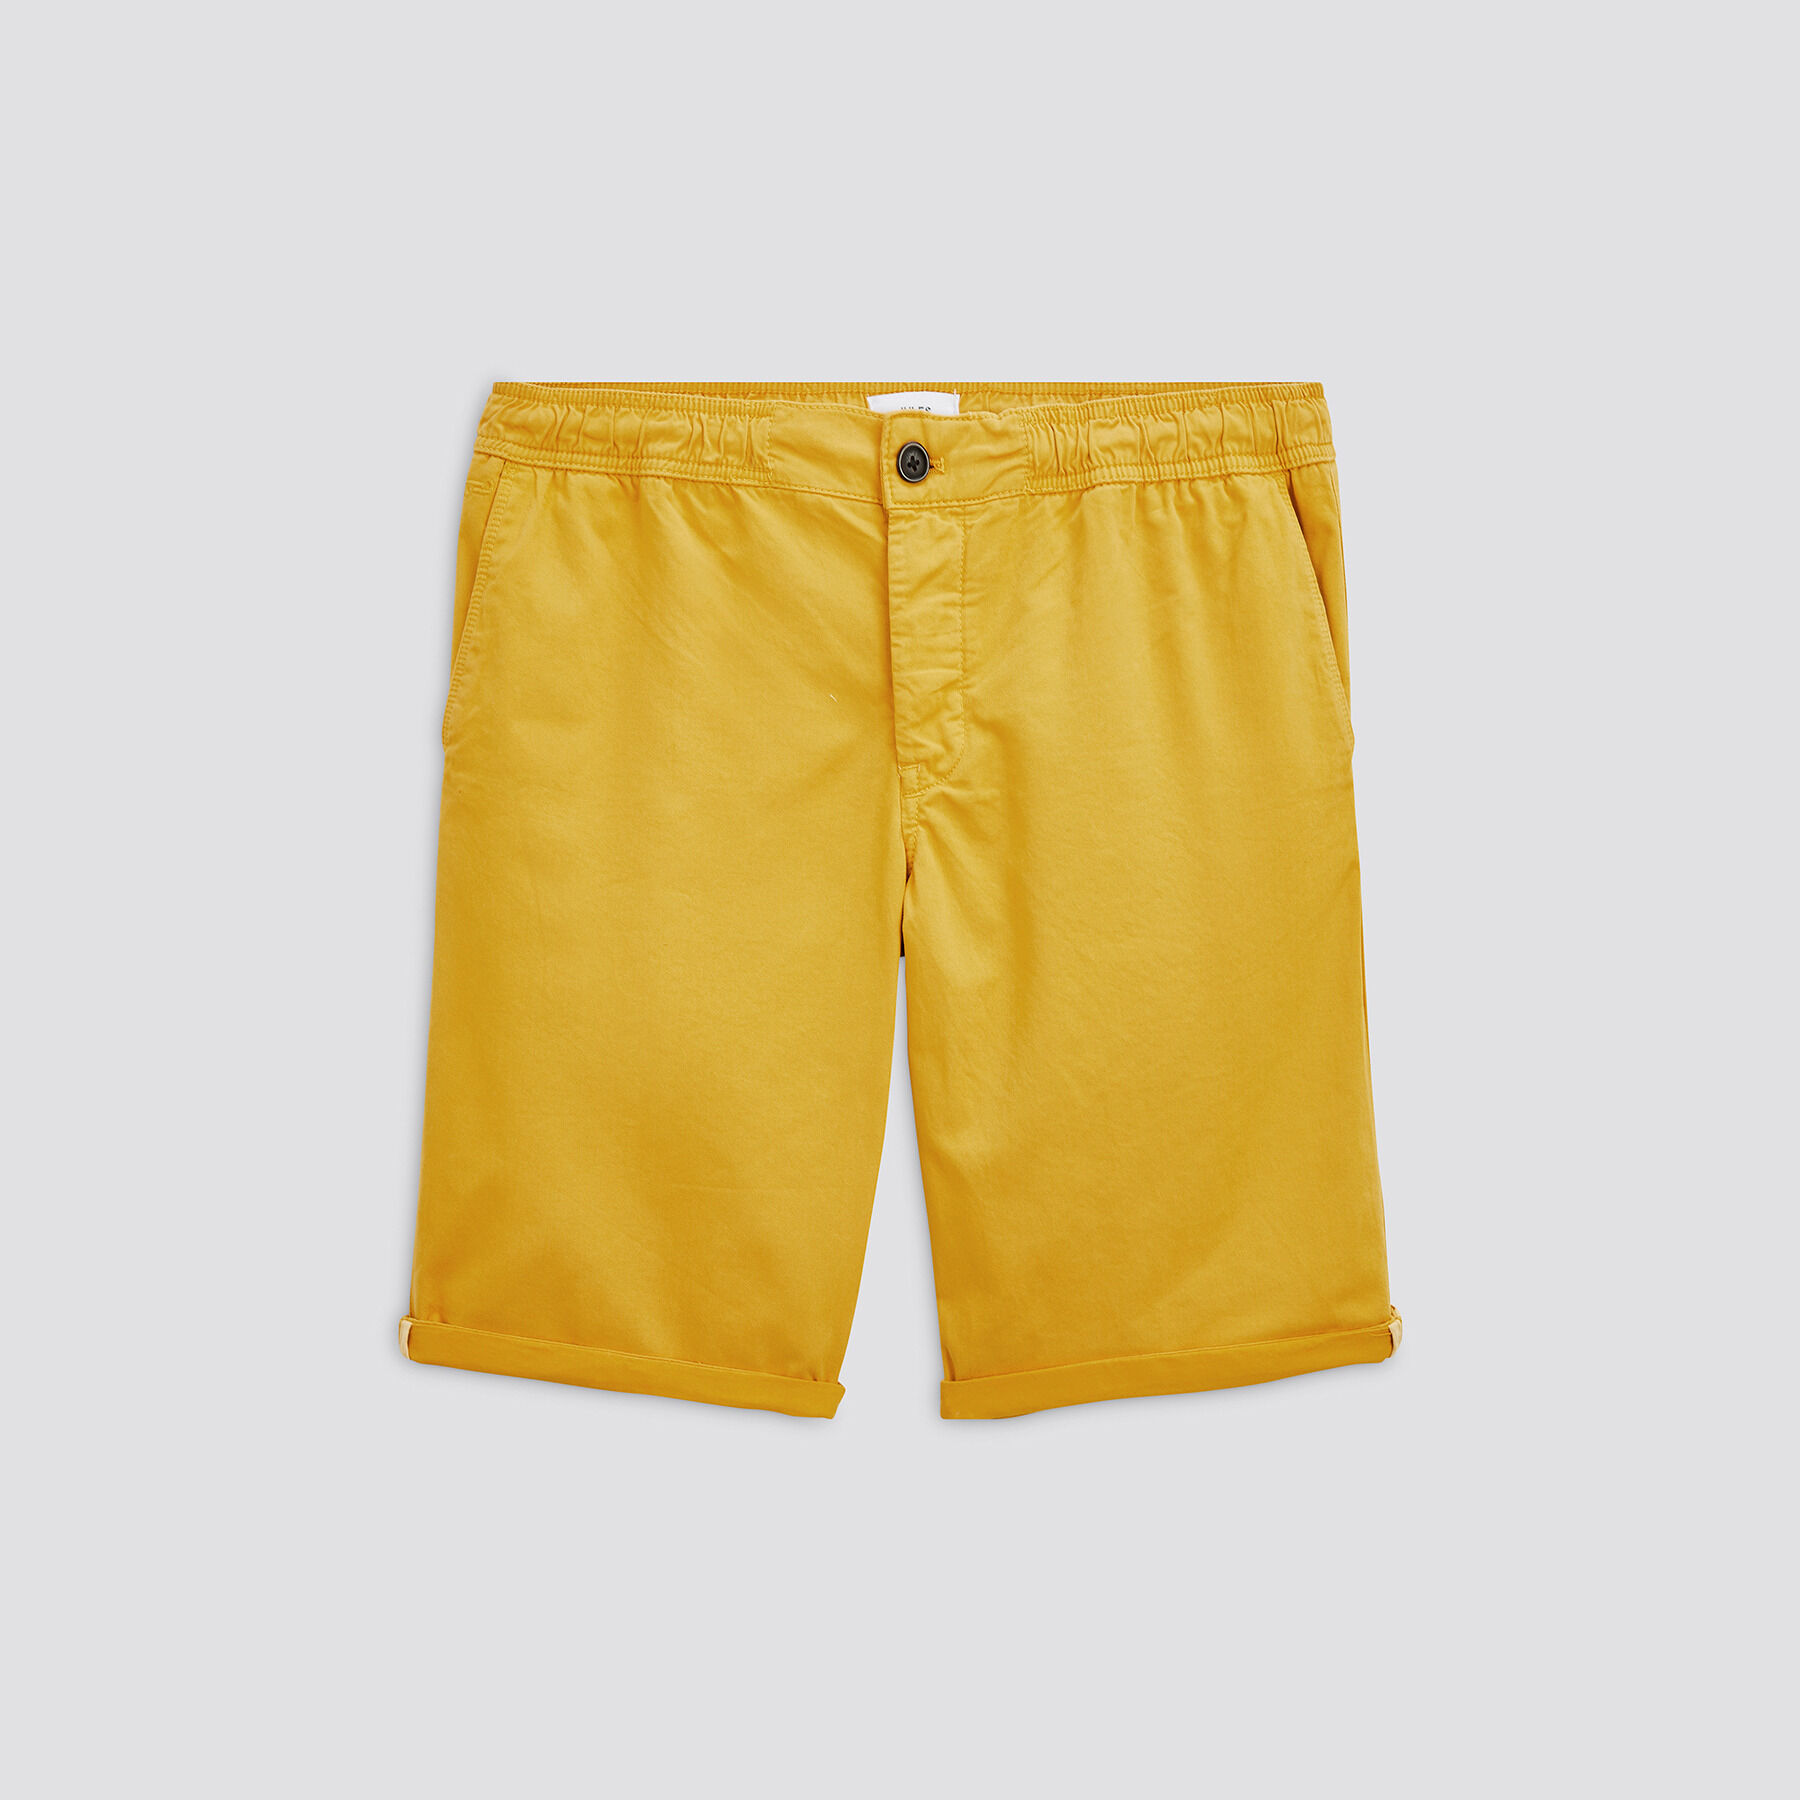 Bermuda chino taille élastiquée Jaune/Or Homme